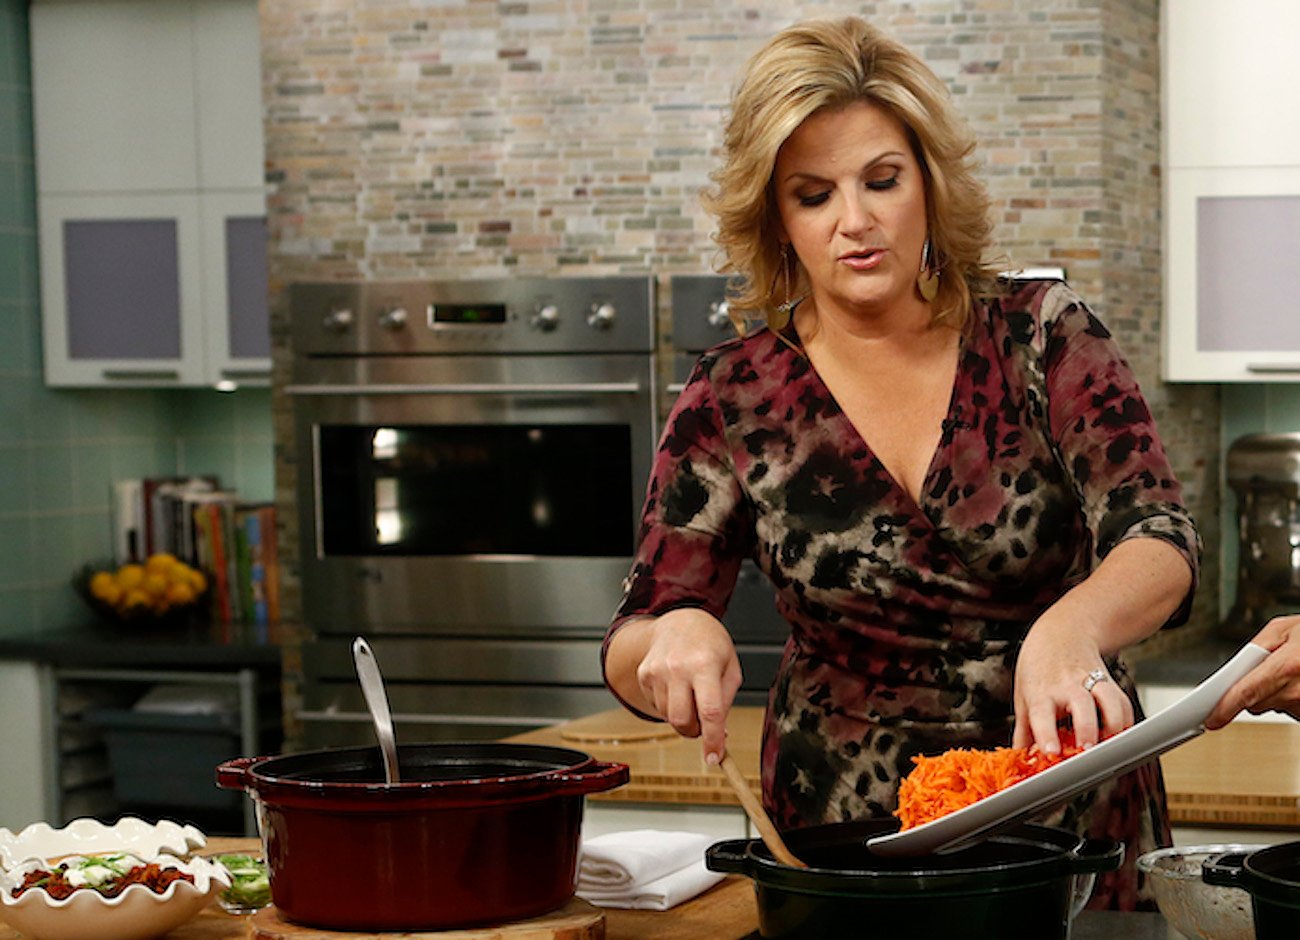 Trisha Yearwood puts an ingredient into a pot during a cooking demo on 'Today'